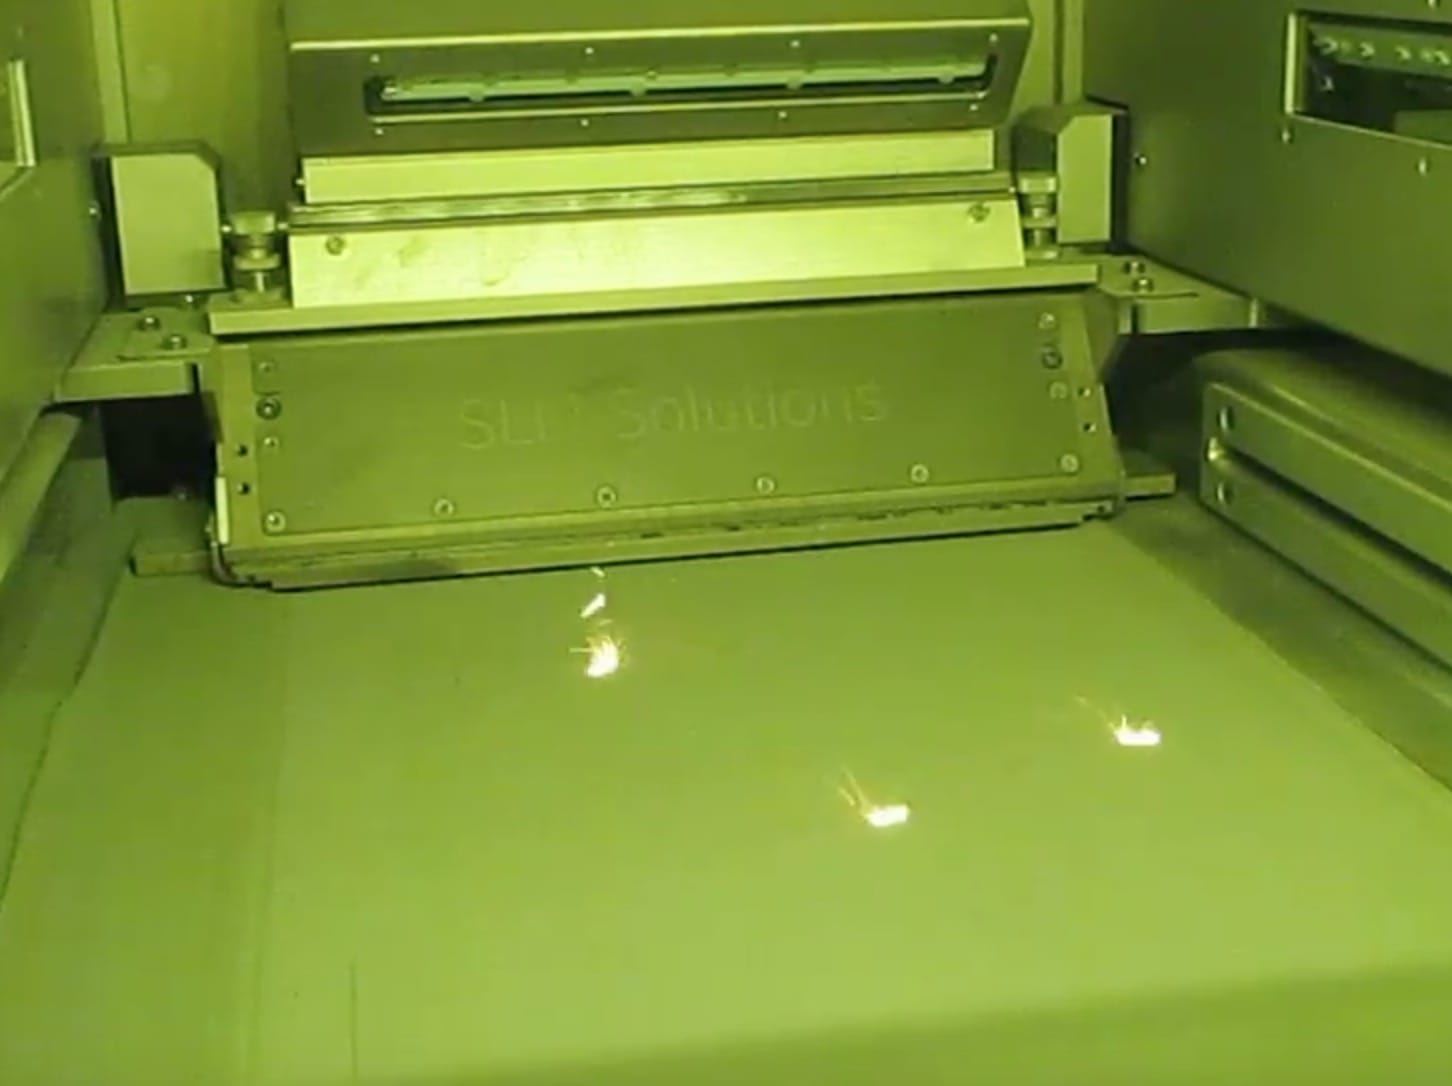  A typical 3D metal printer of today in operation 